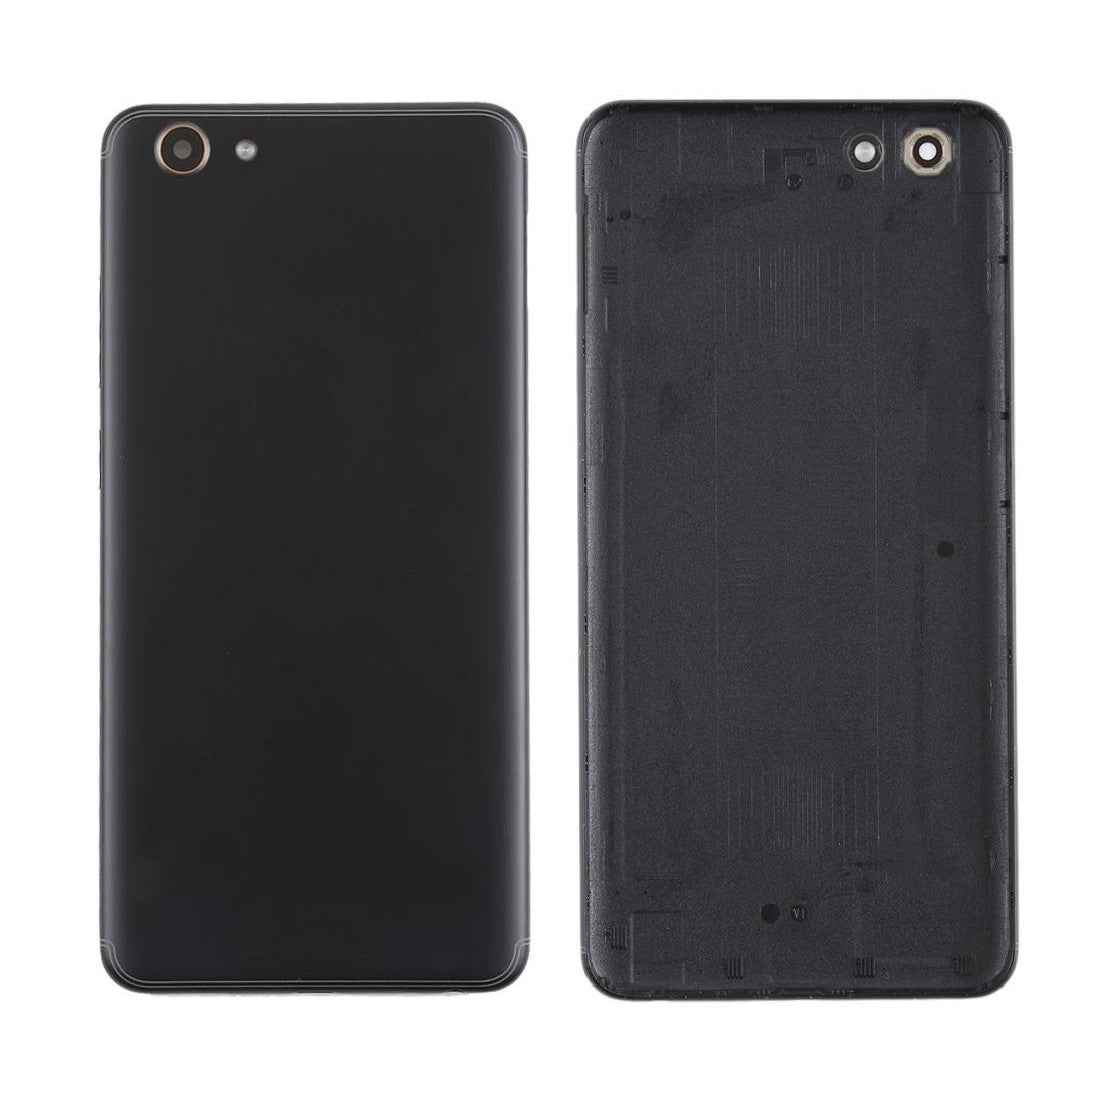 BACK PANEL COVER FOR VIVO Y71